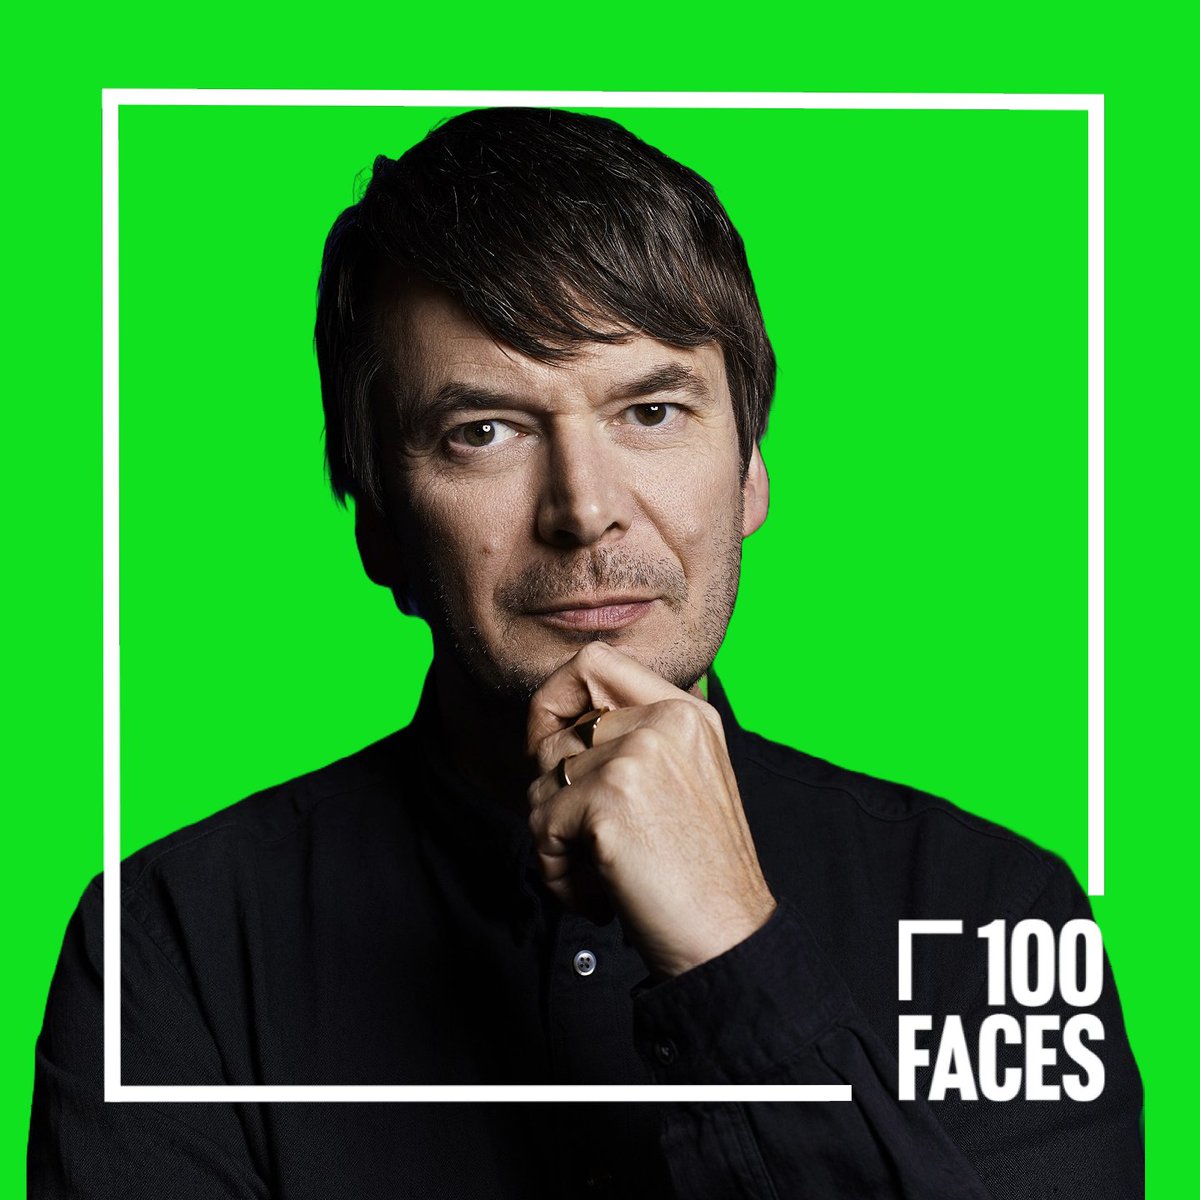 Sir Ian Rankin was the first in his family to go to university, graduating from @EdinburghUni in 1982. He is now a best selling crime writer, known for his Inspector Rebus novels, and received a knighthood last year. #100Faces loom.ly/RryA9bg